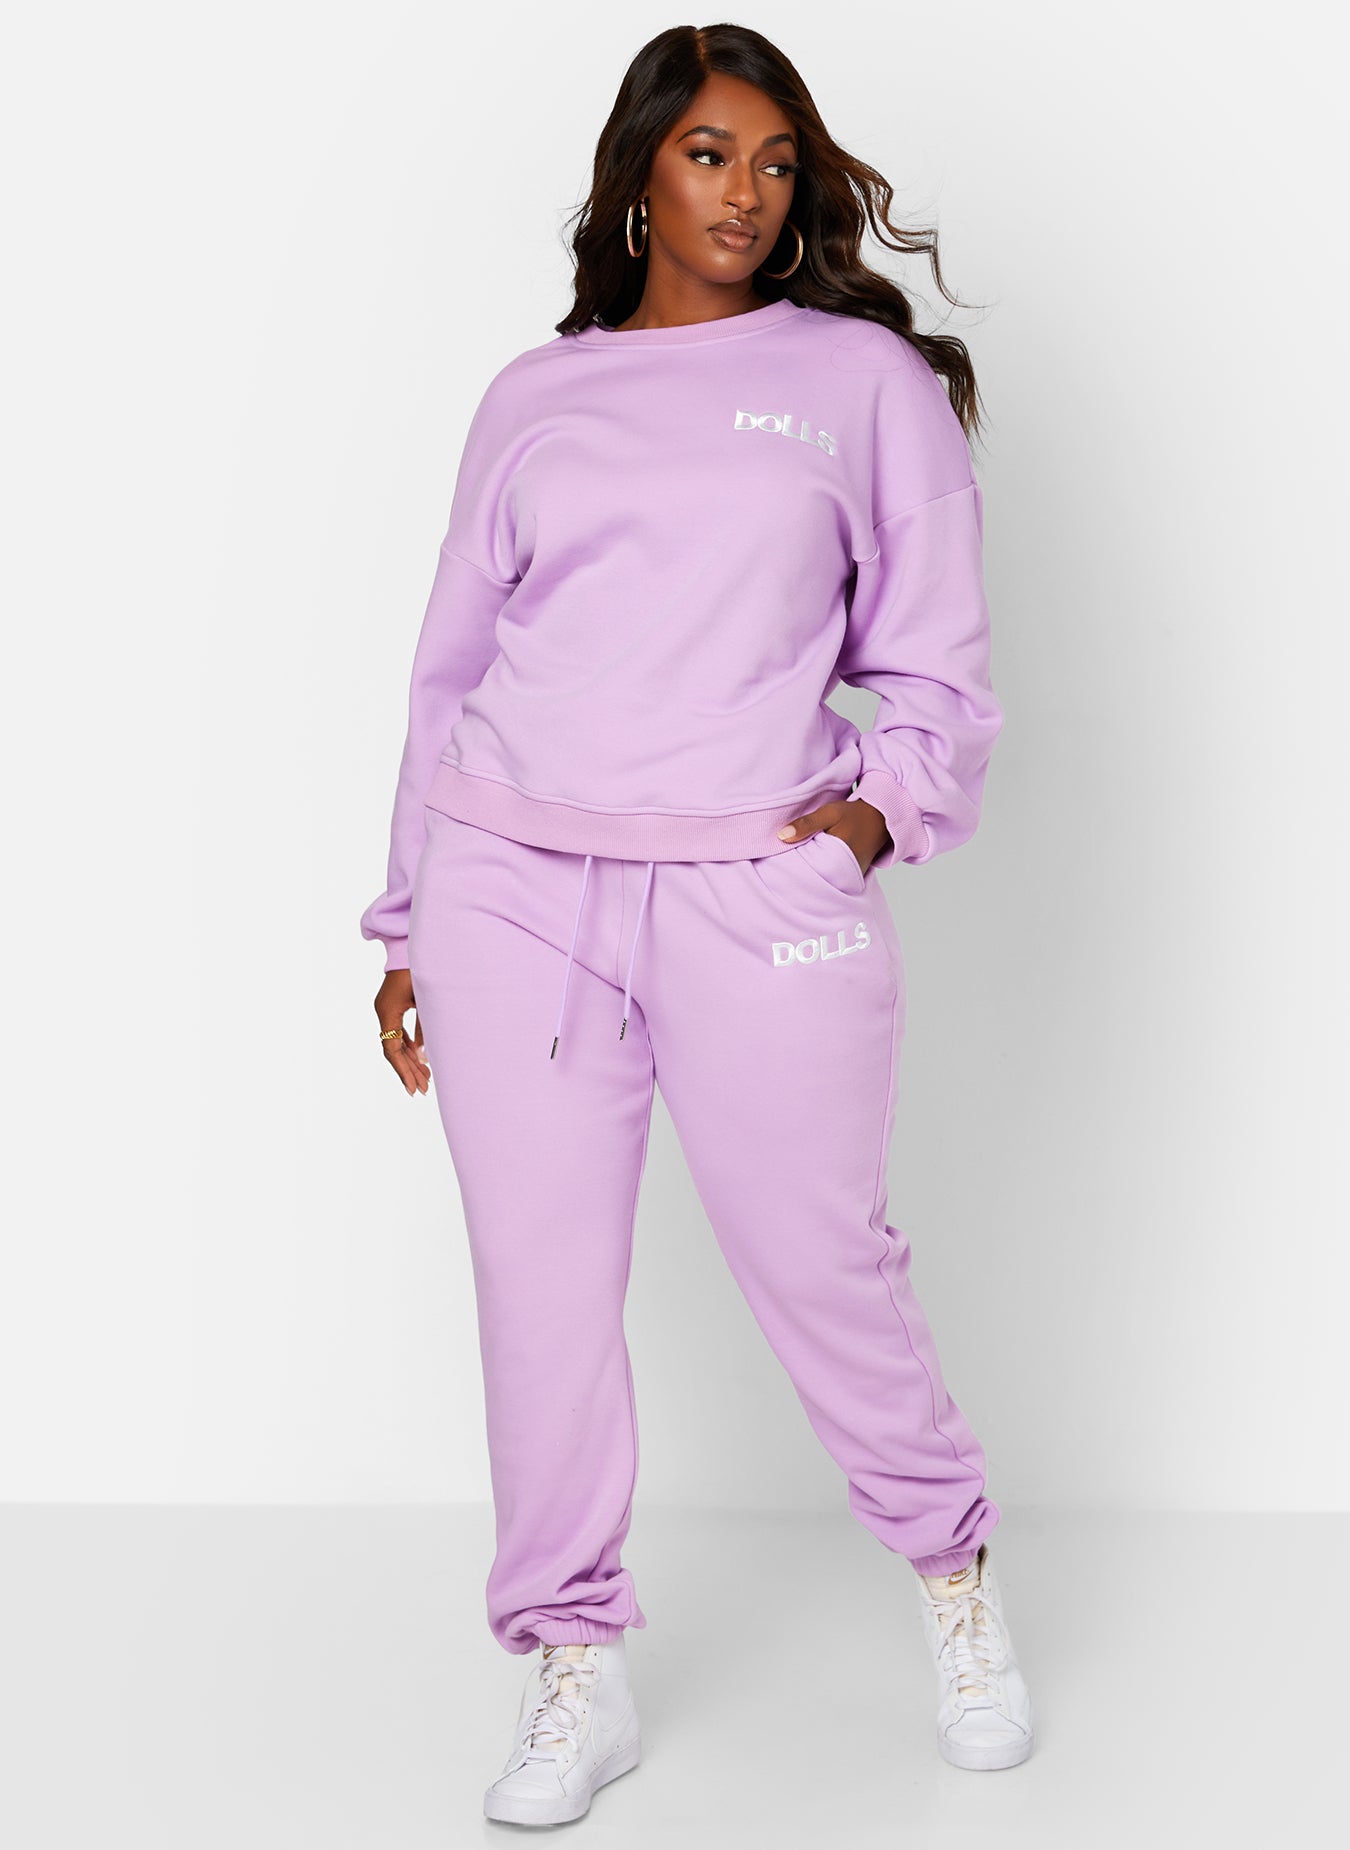 Lilac On The Run Embroidered Drawstring Jogger Sweatpants W. Pockets Plus Sizes